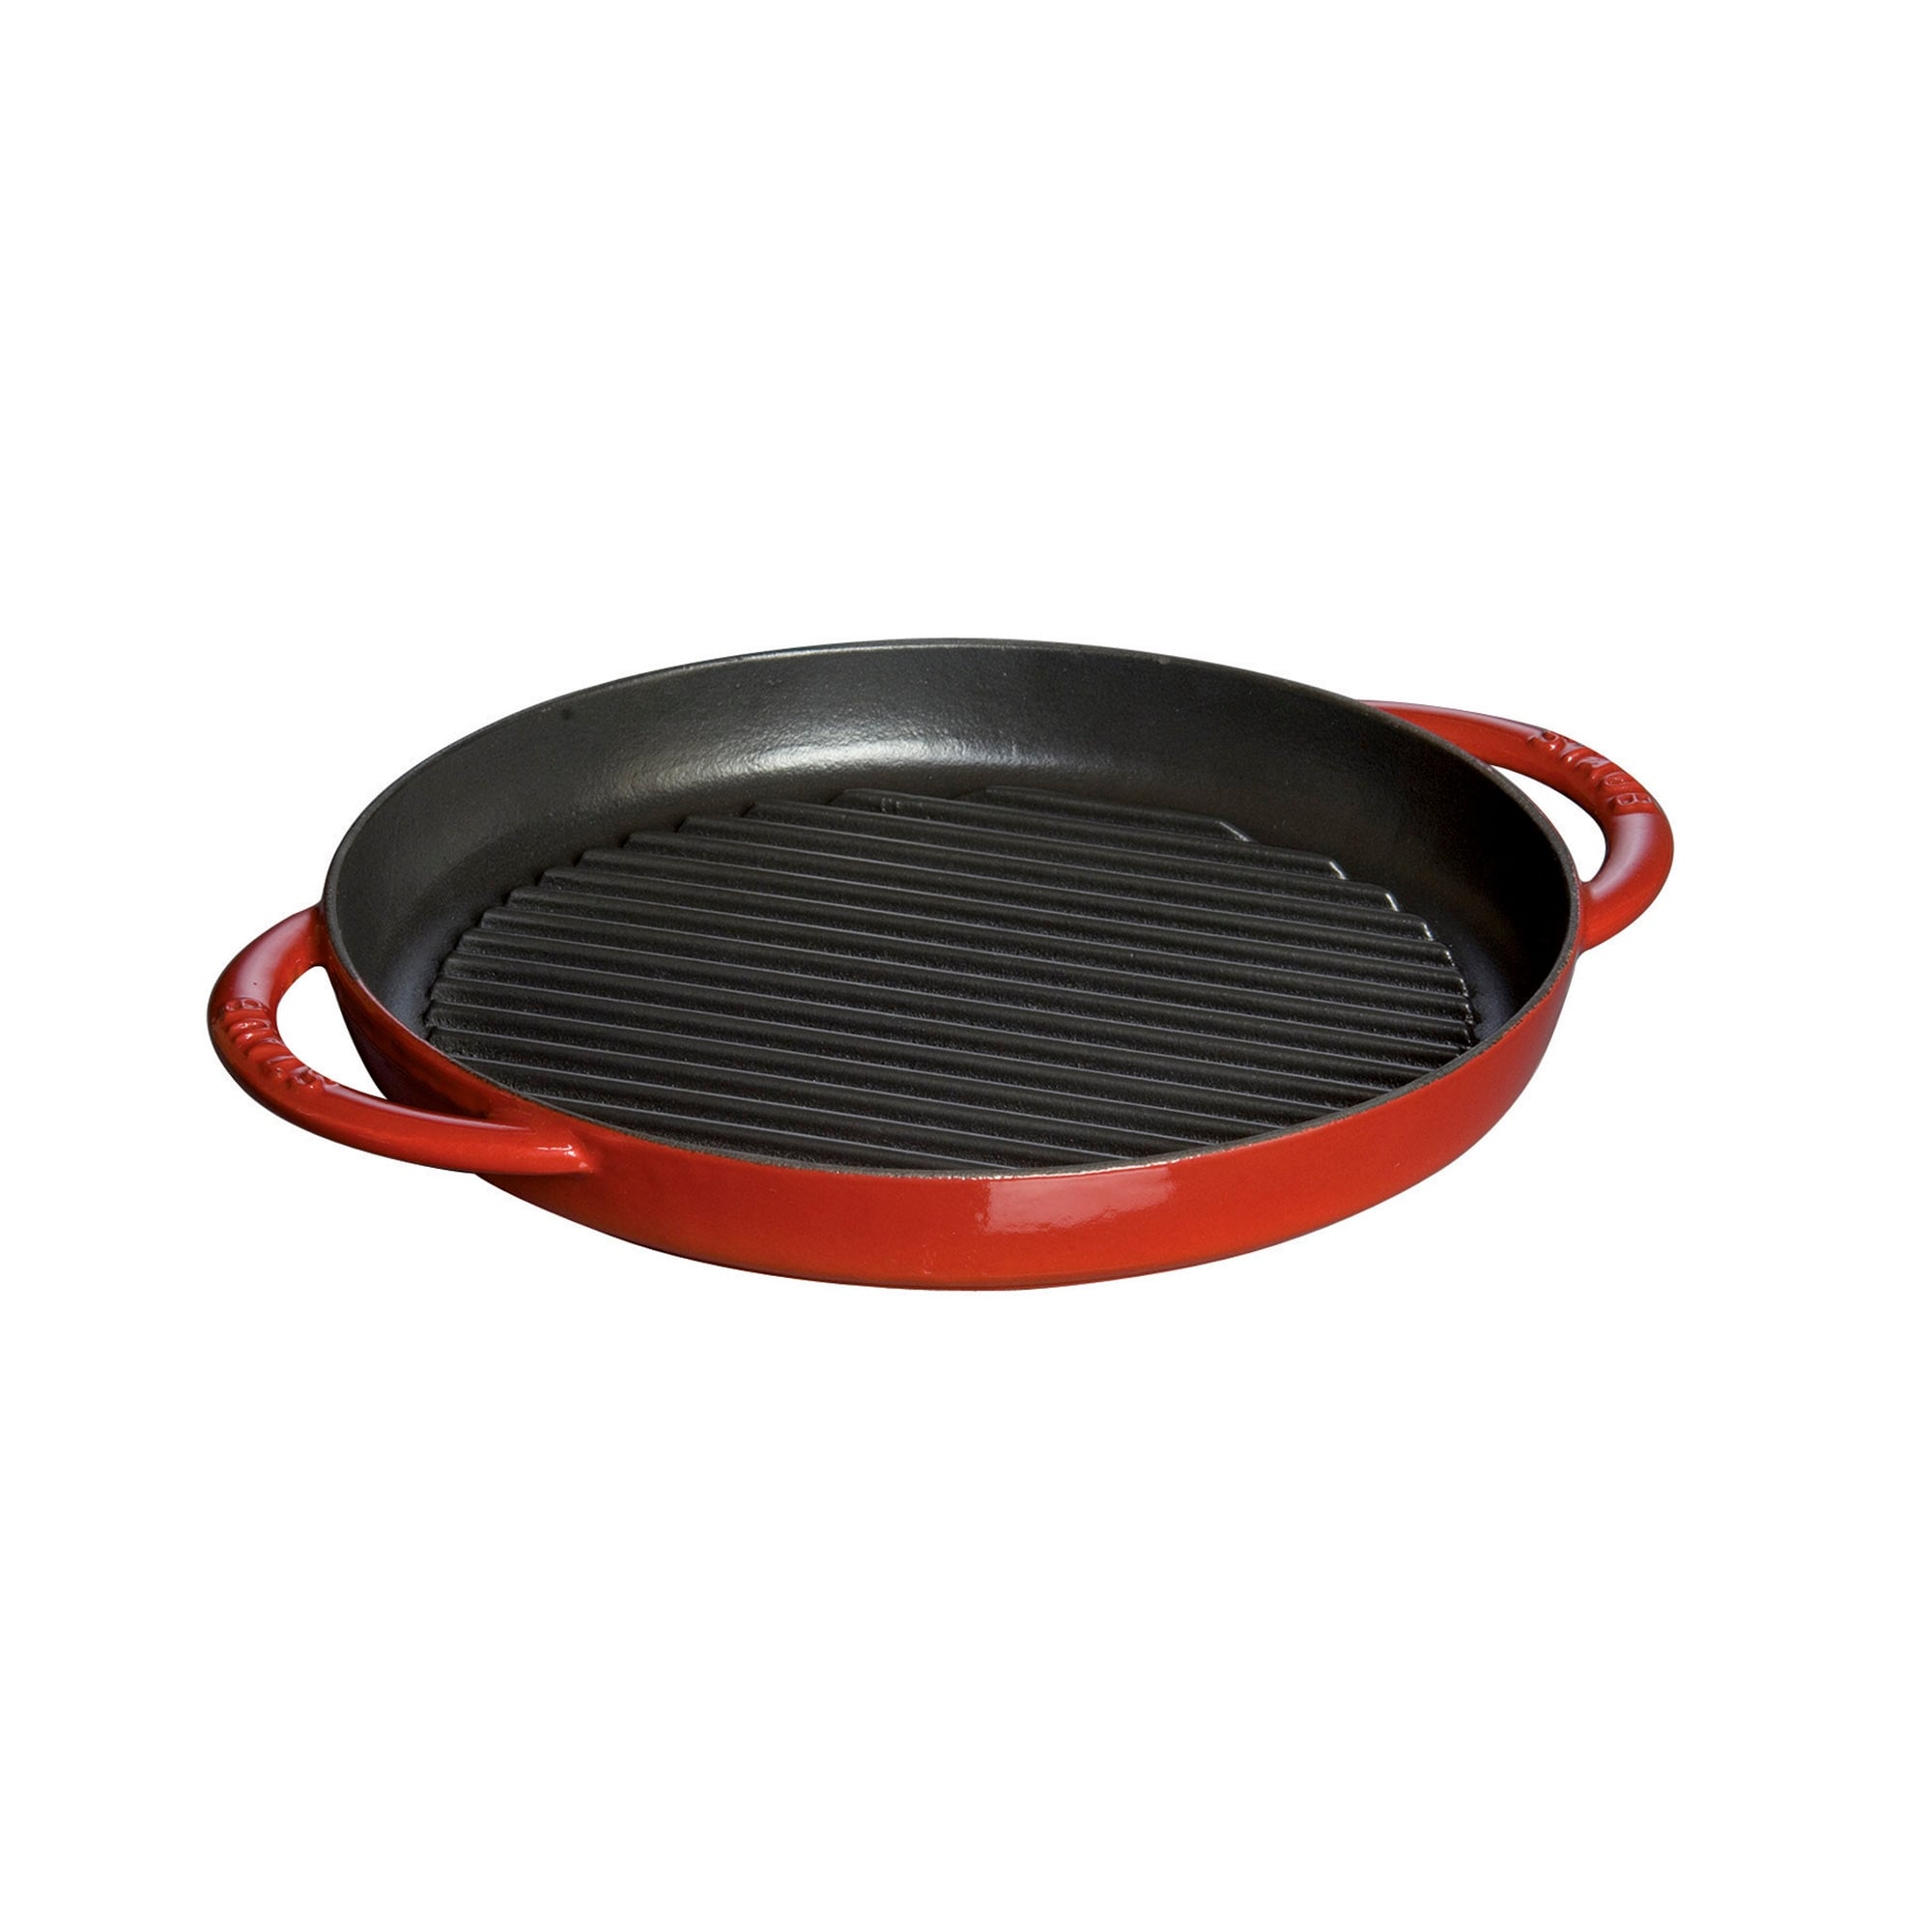  Staub Cast Iron 3-pc Cocotte and Fry Pan Set-Grenadine, Made in  France: Home & Kitchen